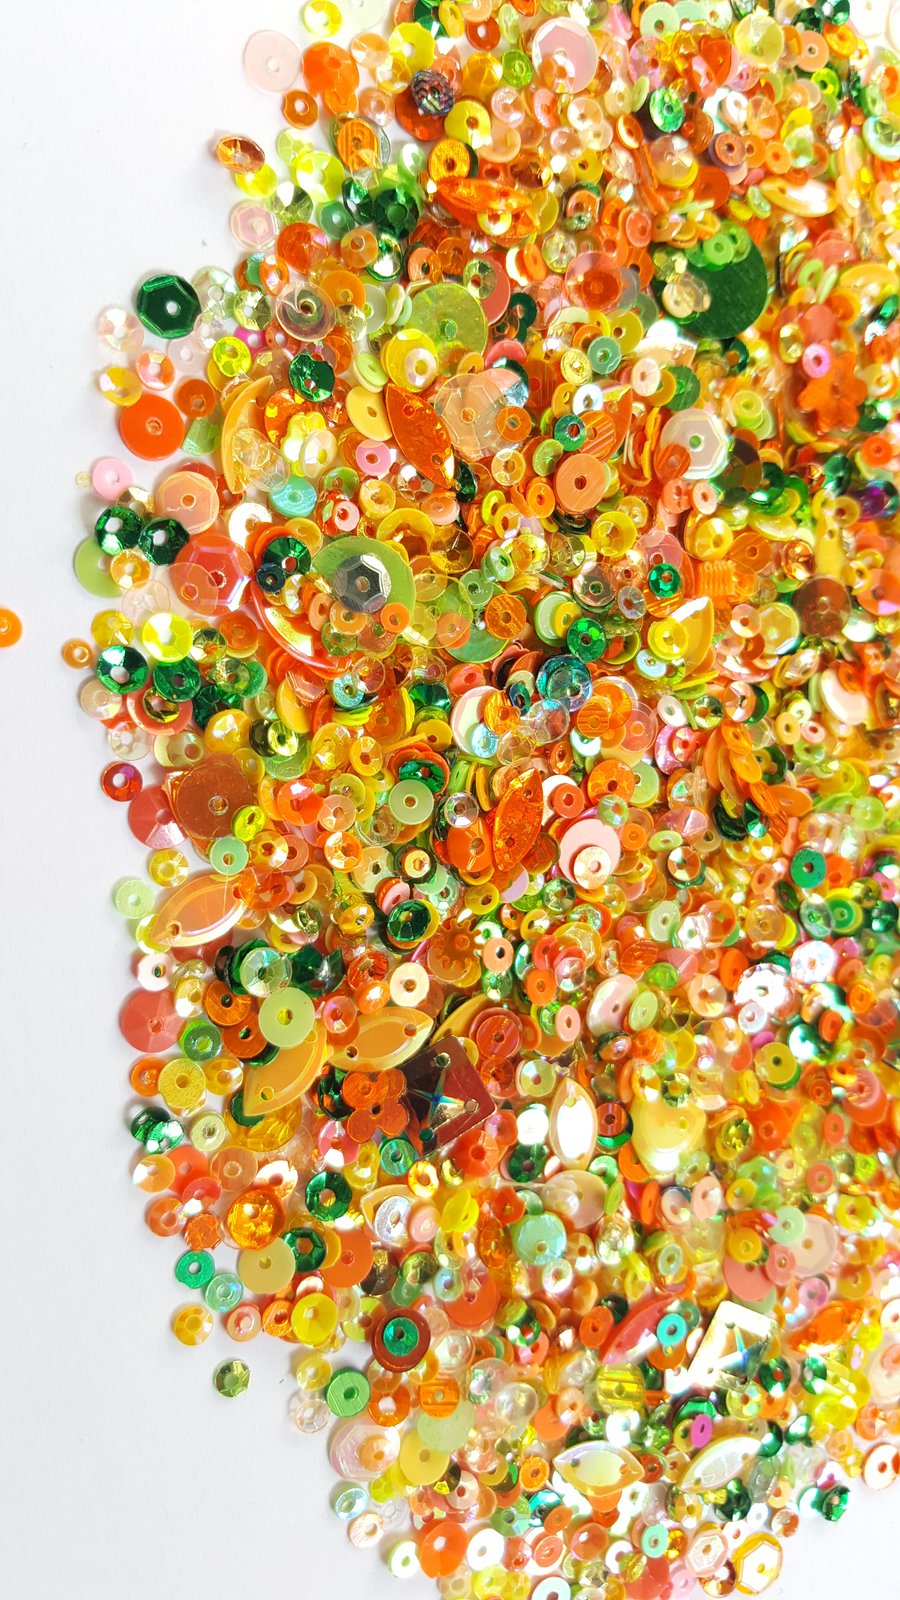 5g Craft Sequin Confetti - Mixed Sizes - Mixed Shapes - Spring Mix